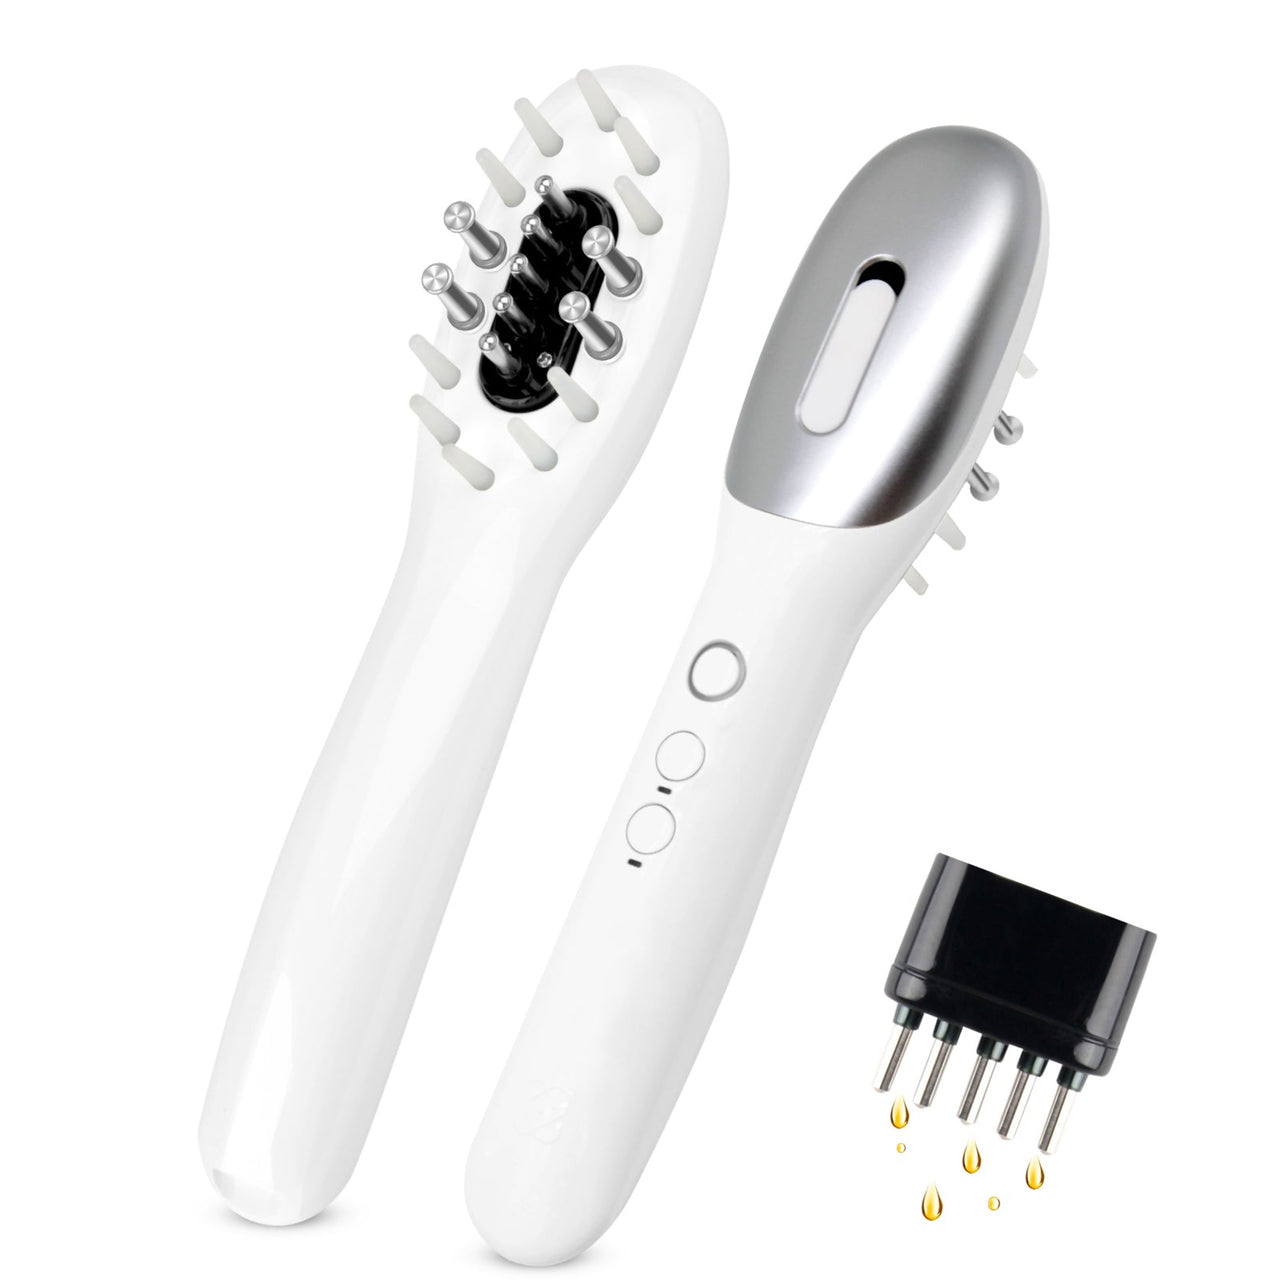 3-IN-1 Electric Hair Oil Applicator with Red Light